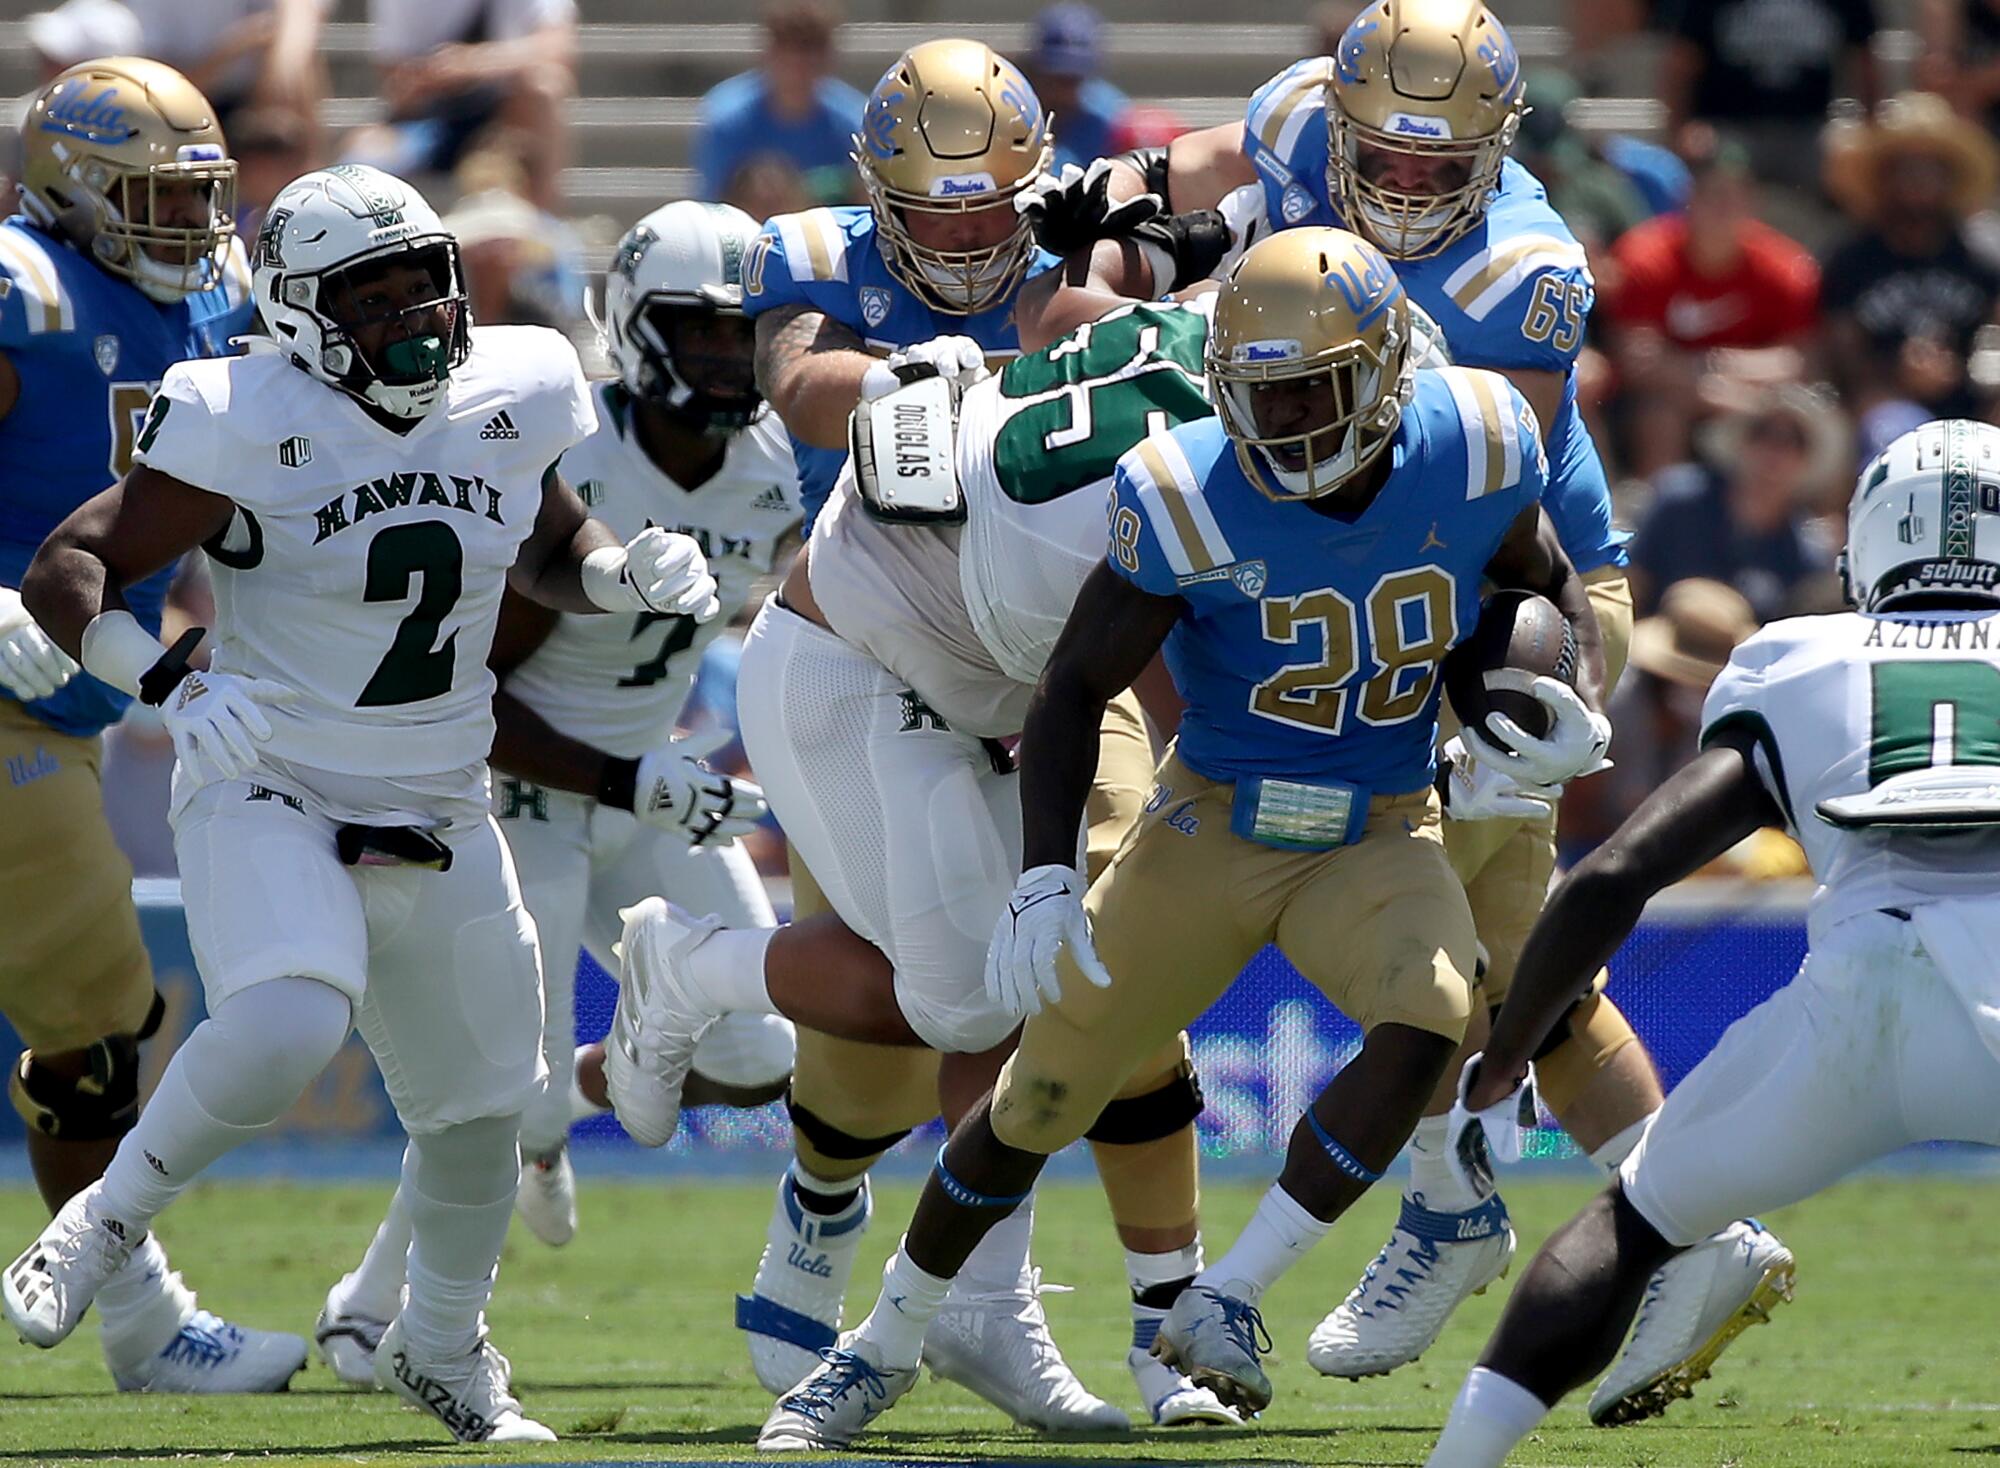 UCLA running back Brittain Brown looks for room to run against Hawaii in the second quarter.